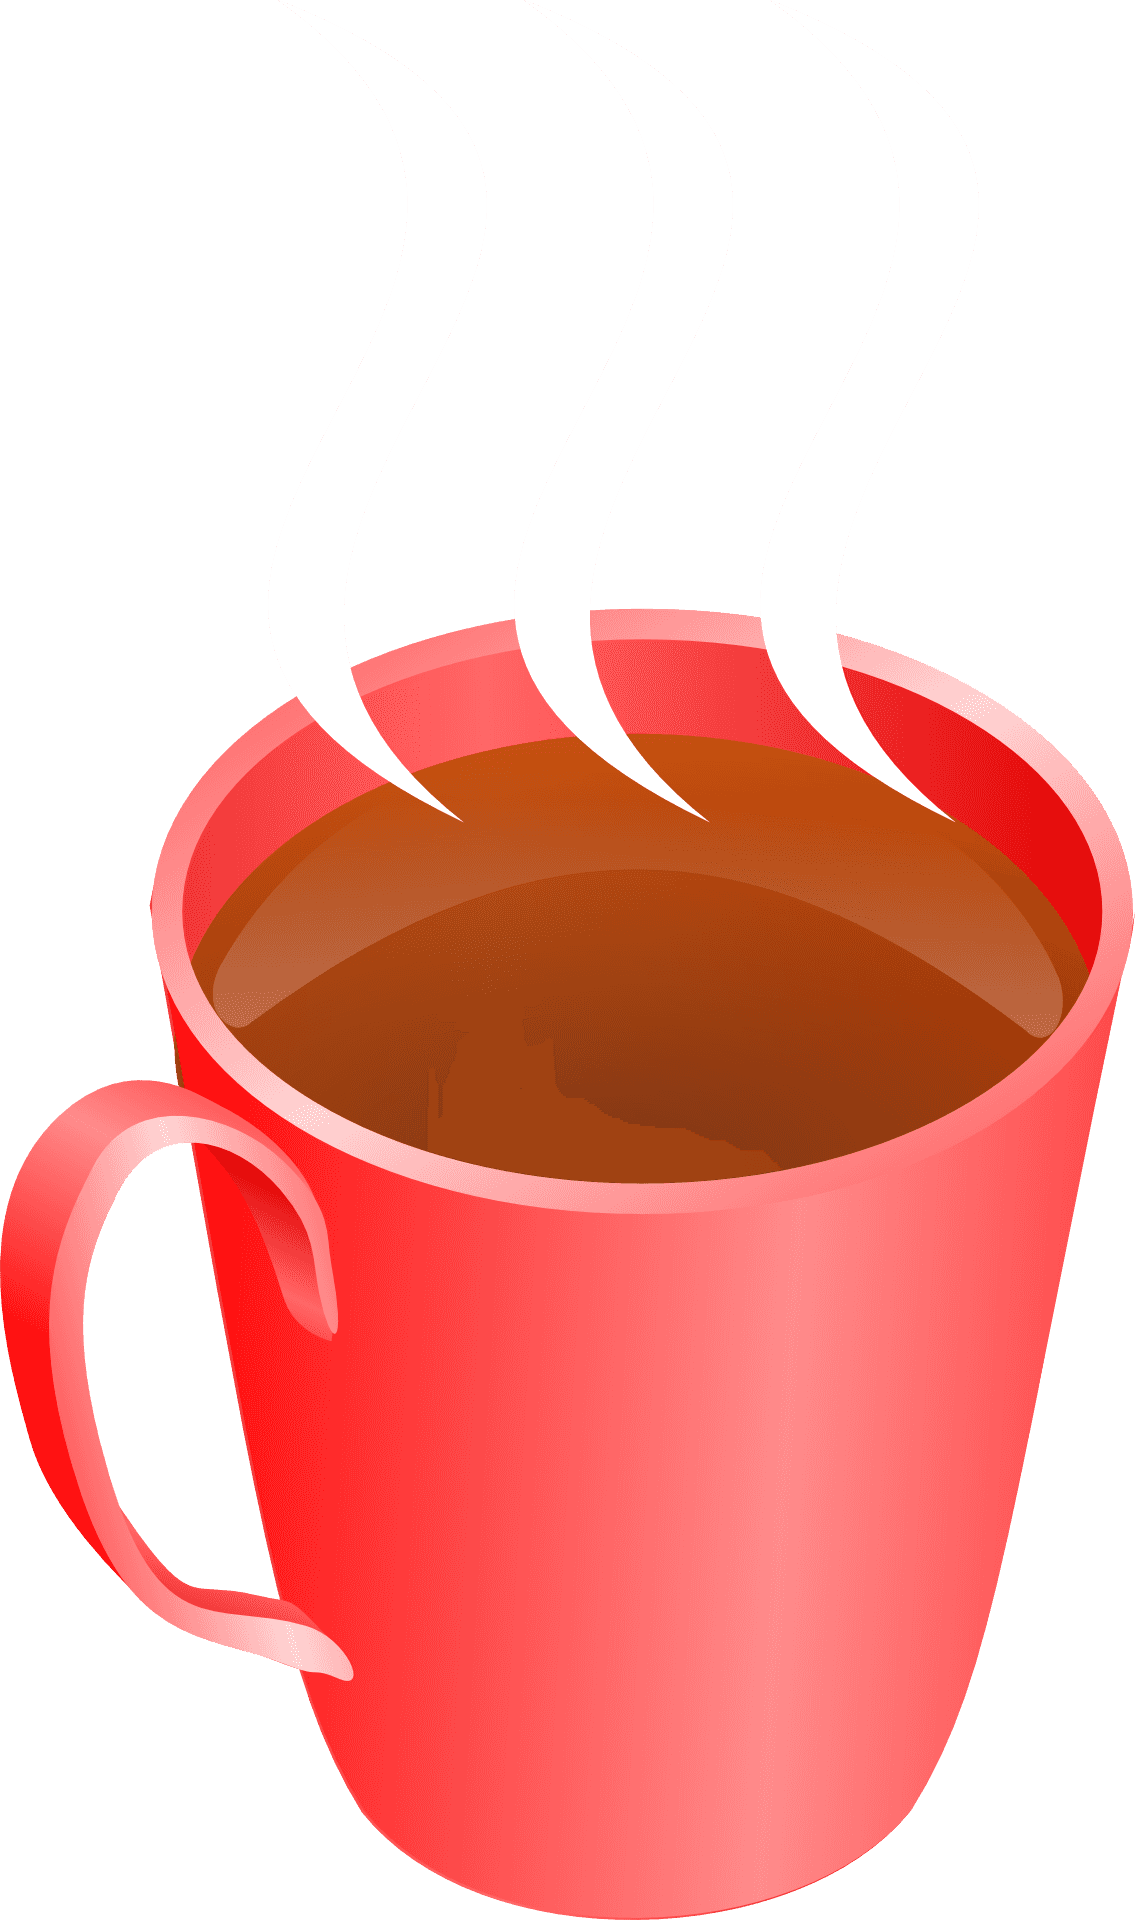 Steaming Red Tea Cup Vector PNG